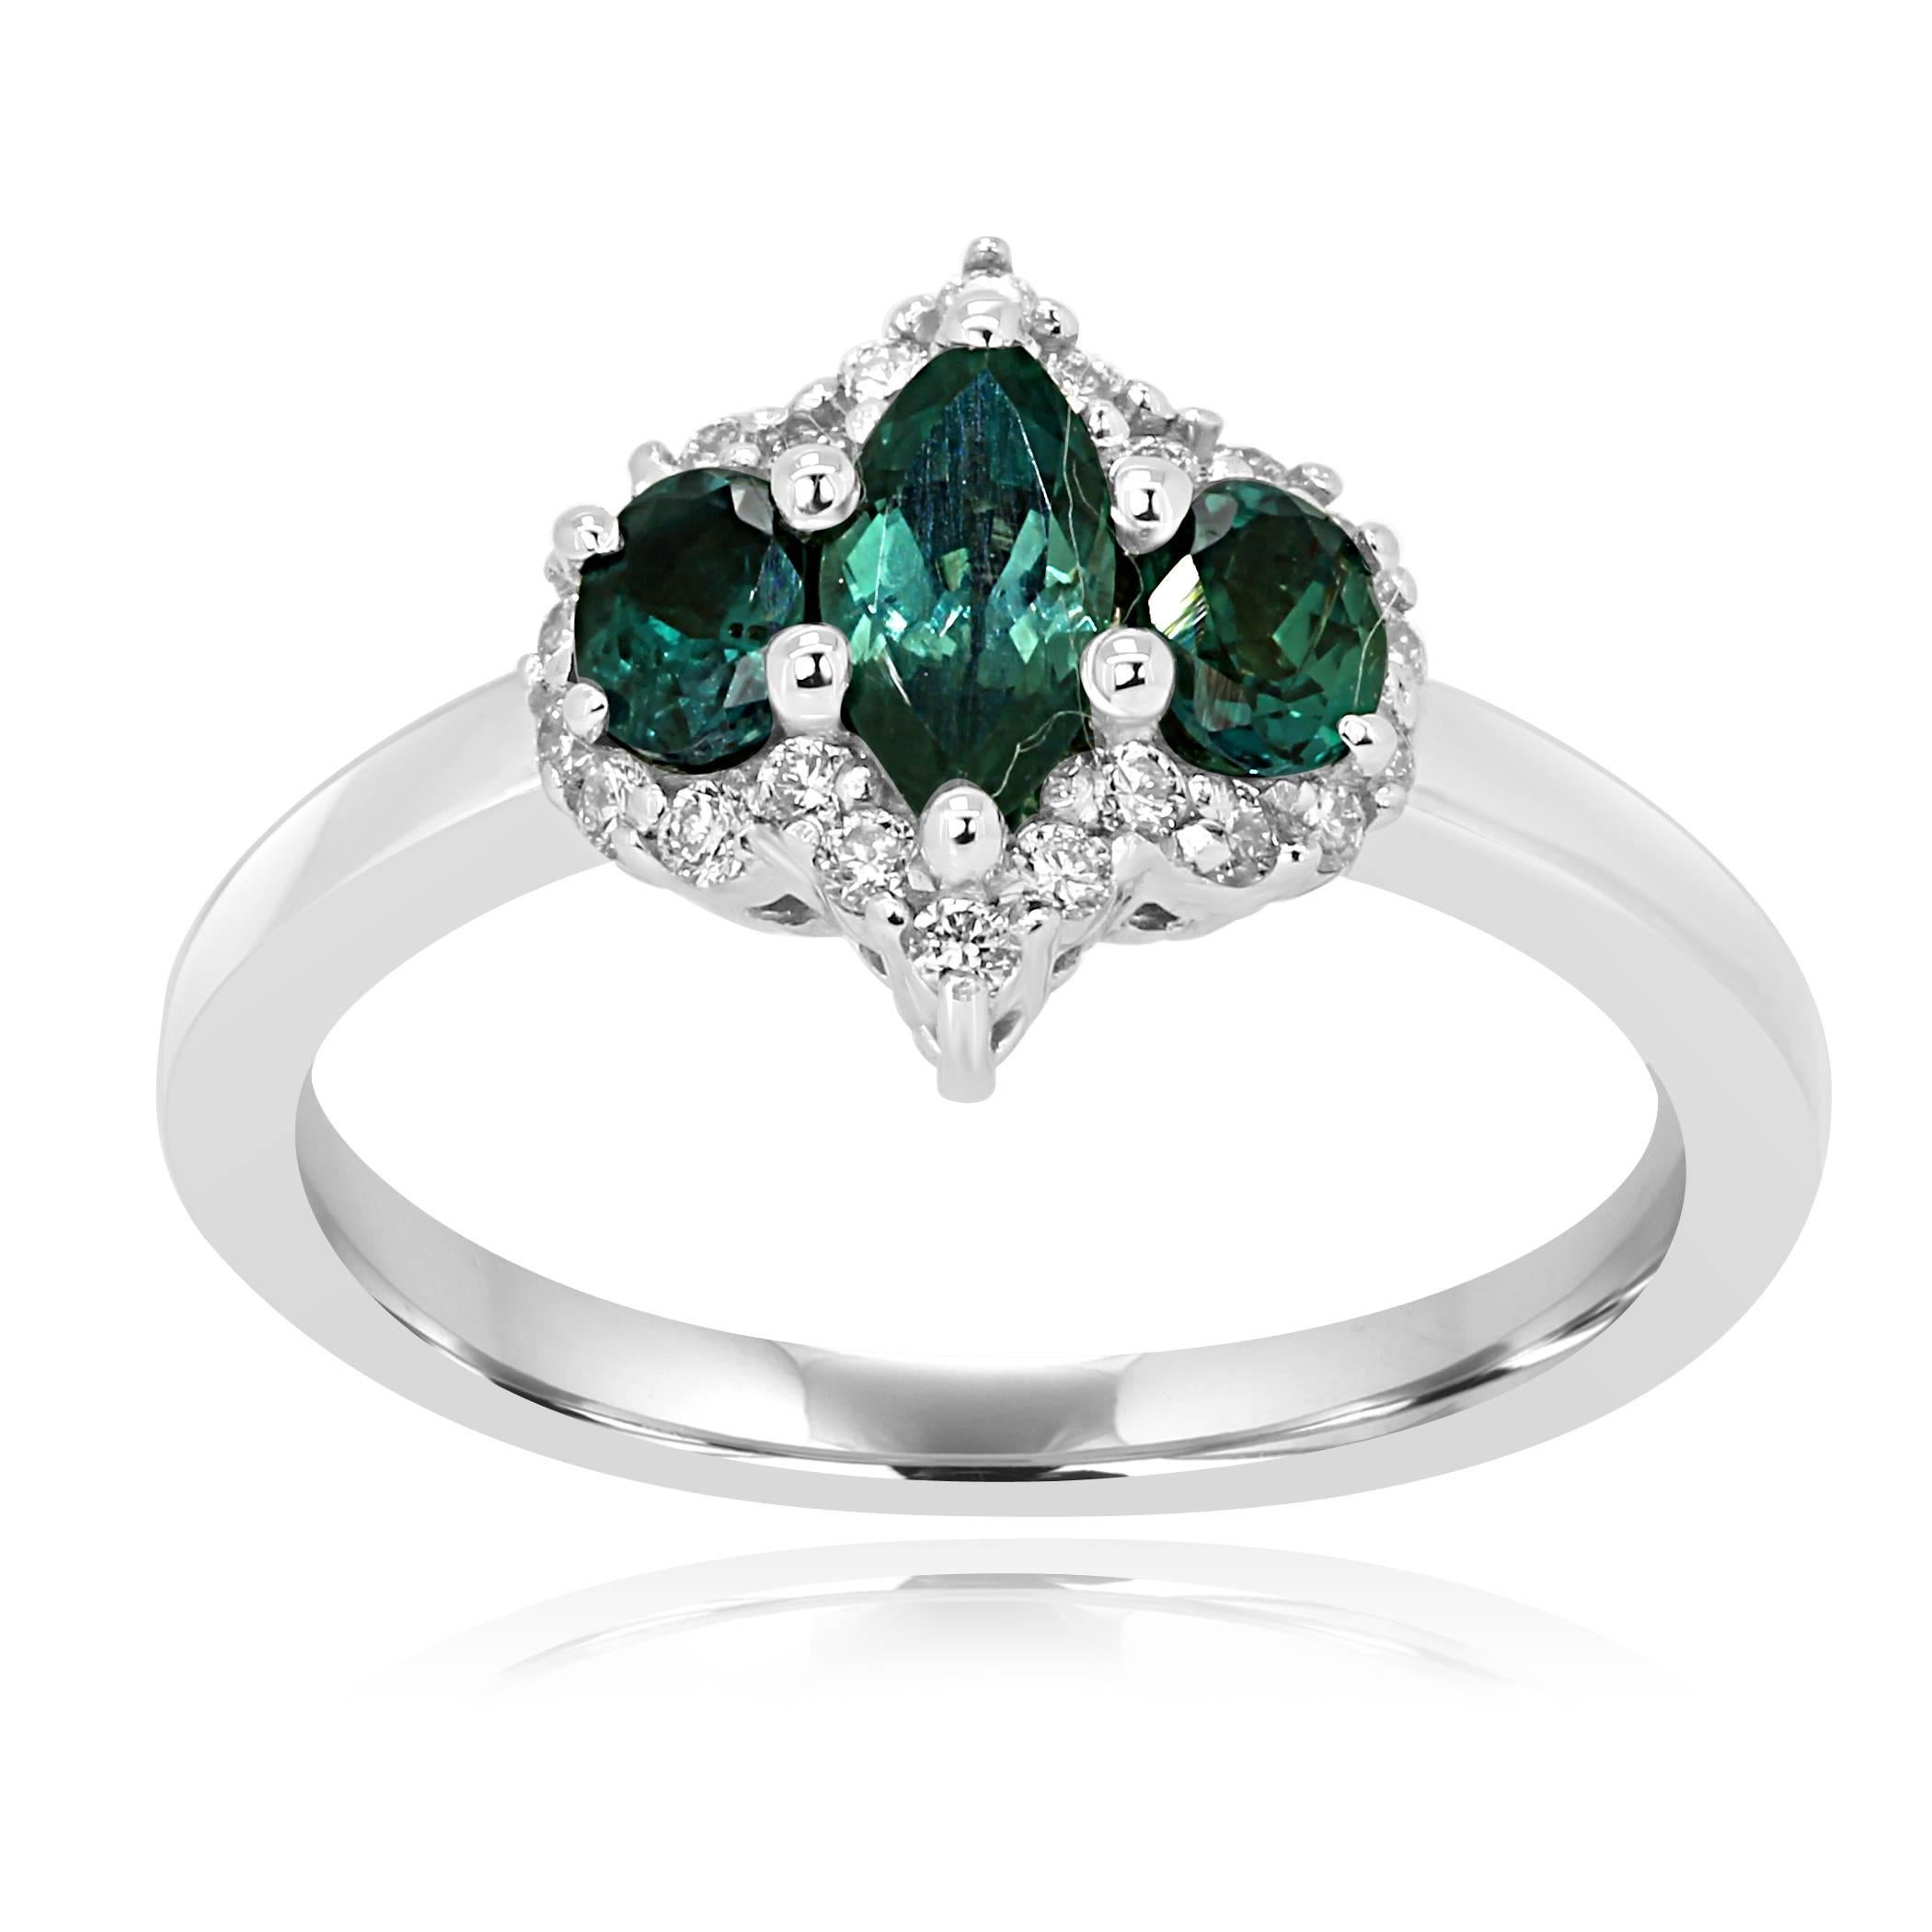 1 Alexandrite Marquise 0.41 Carat flanked by 2 Alexandrite Ovals 0.45 Carat in a single Halo of white diamond Rounds 0.18 Carat in 14K White Gold Three Stone Bridal Fashion Cocktail Ring.

Style available in different price ranges. Prices are based